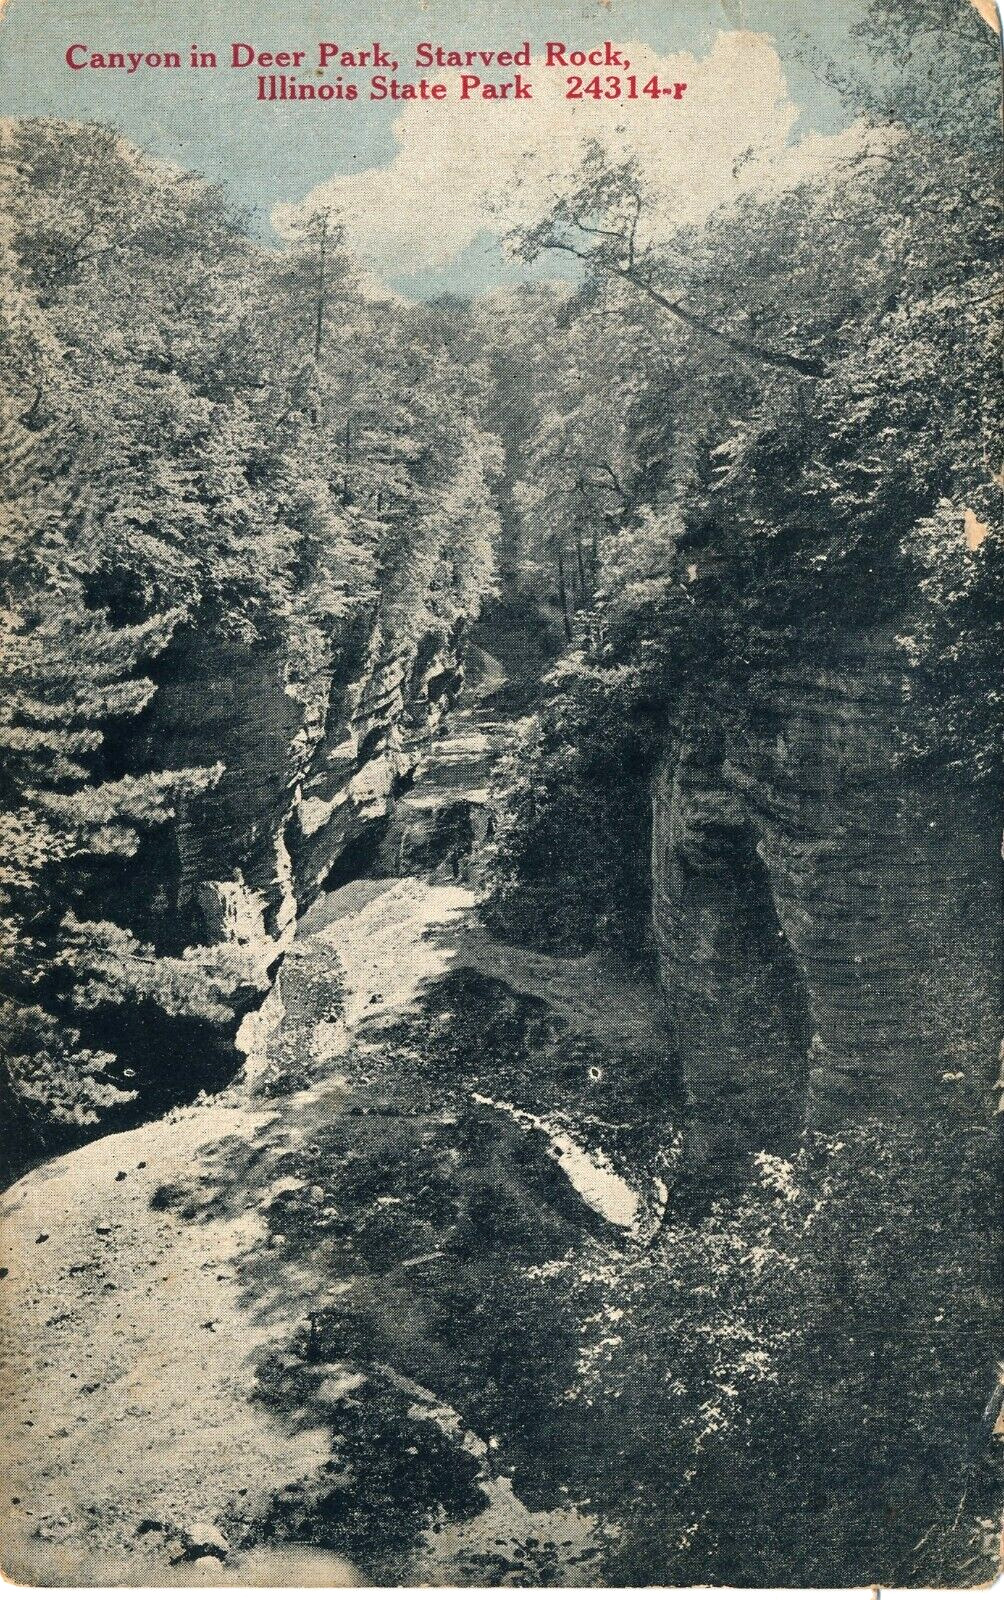 Canyon in Deer Park at Starved Rock State Park, IL 1923 posted postcard